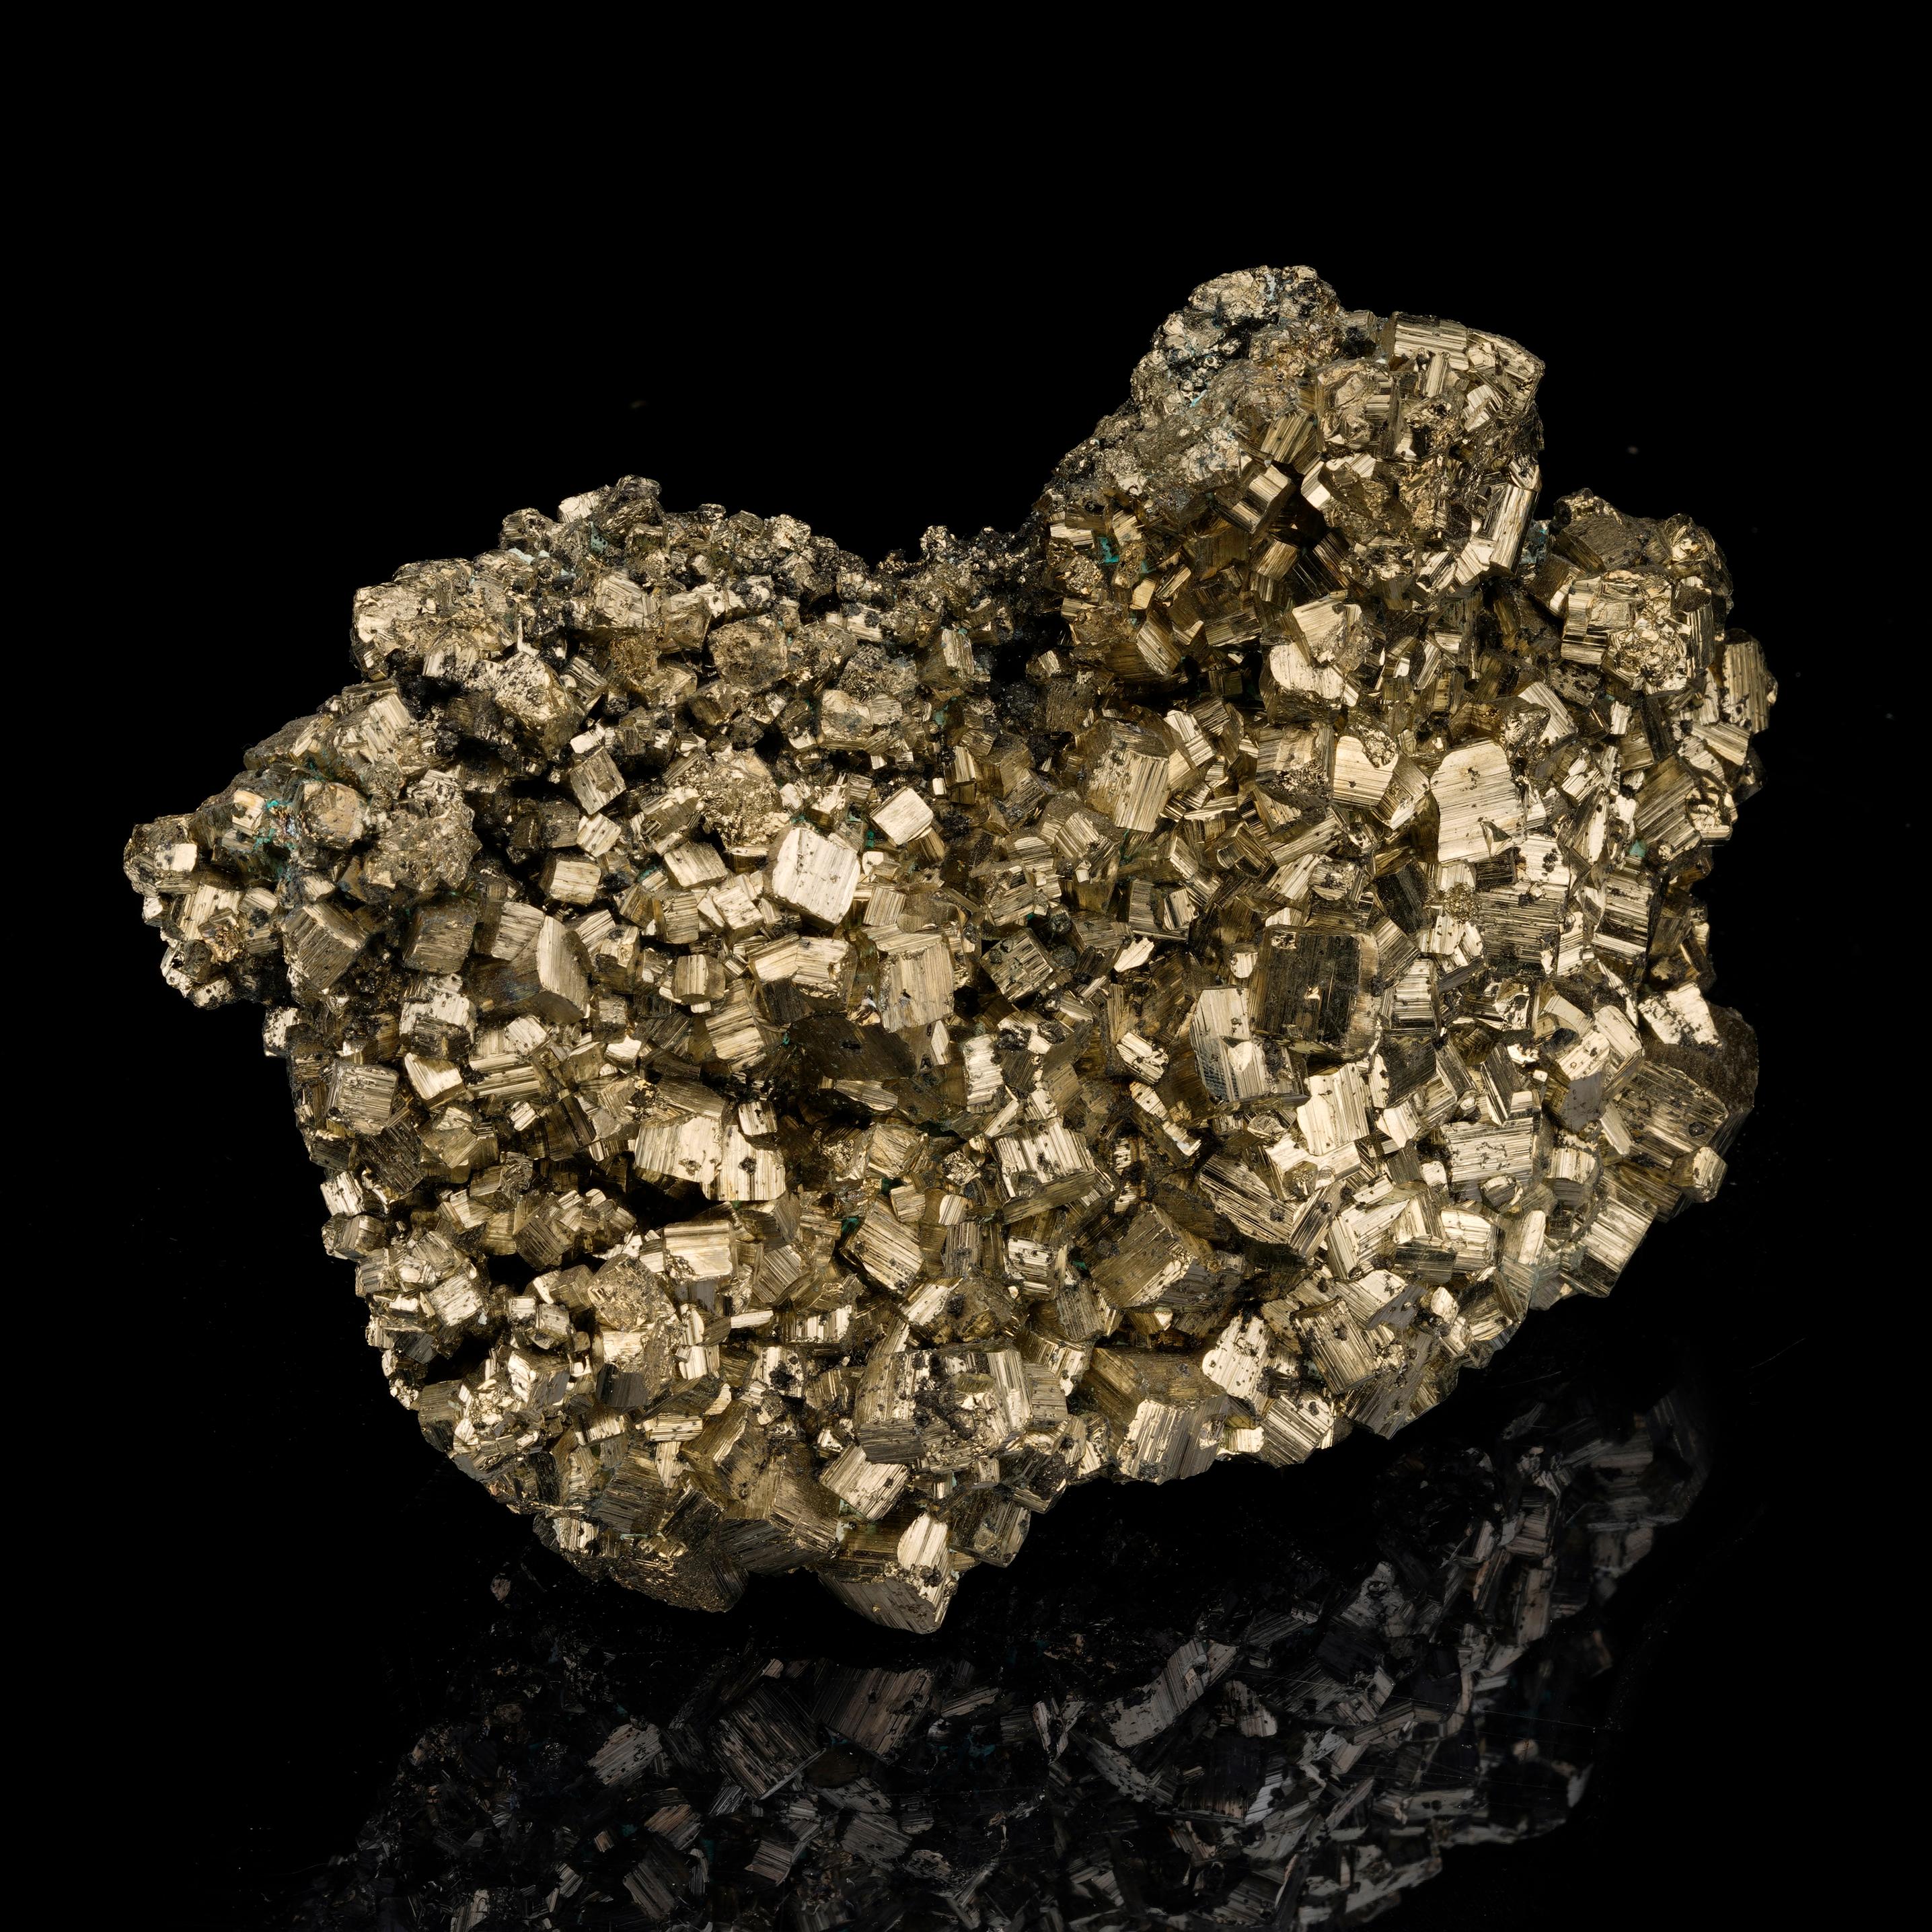 This sizable pyrite specimen features a bright, golden hue and mirror-like luster. Peru is known for its pyrite deposits and pieces from this location are coveted for their color and luster. With a plethora of beautiful, fully formed crystals, this